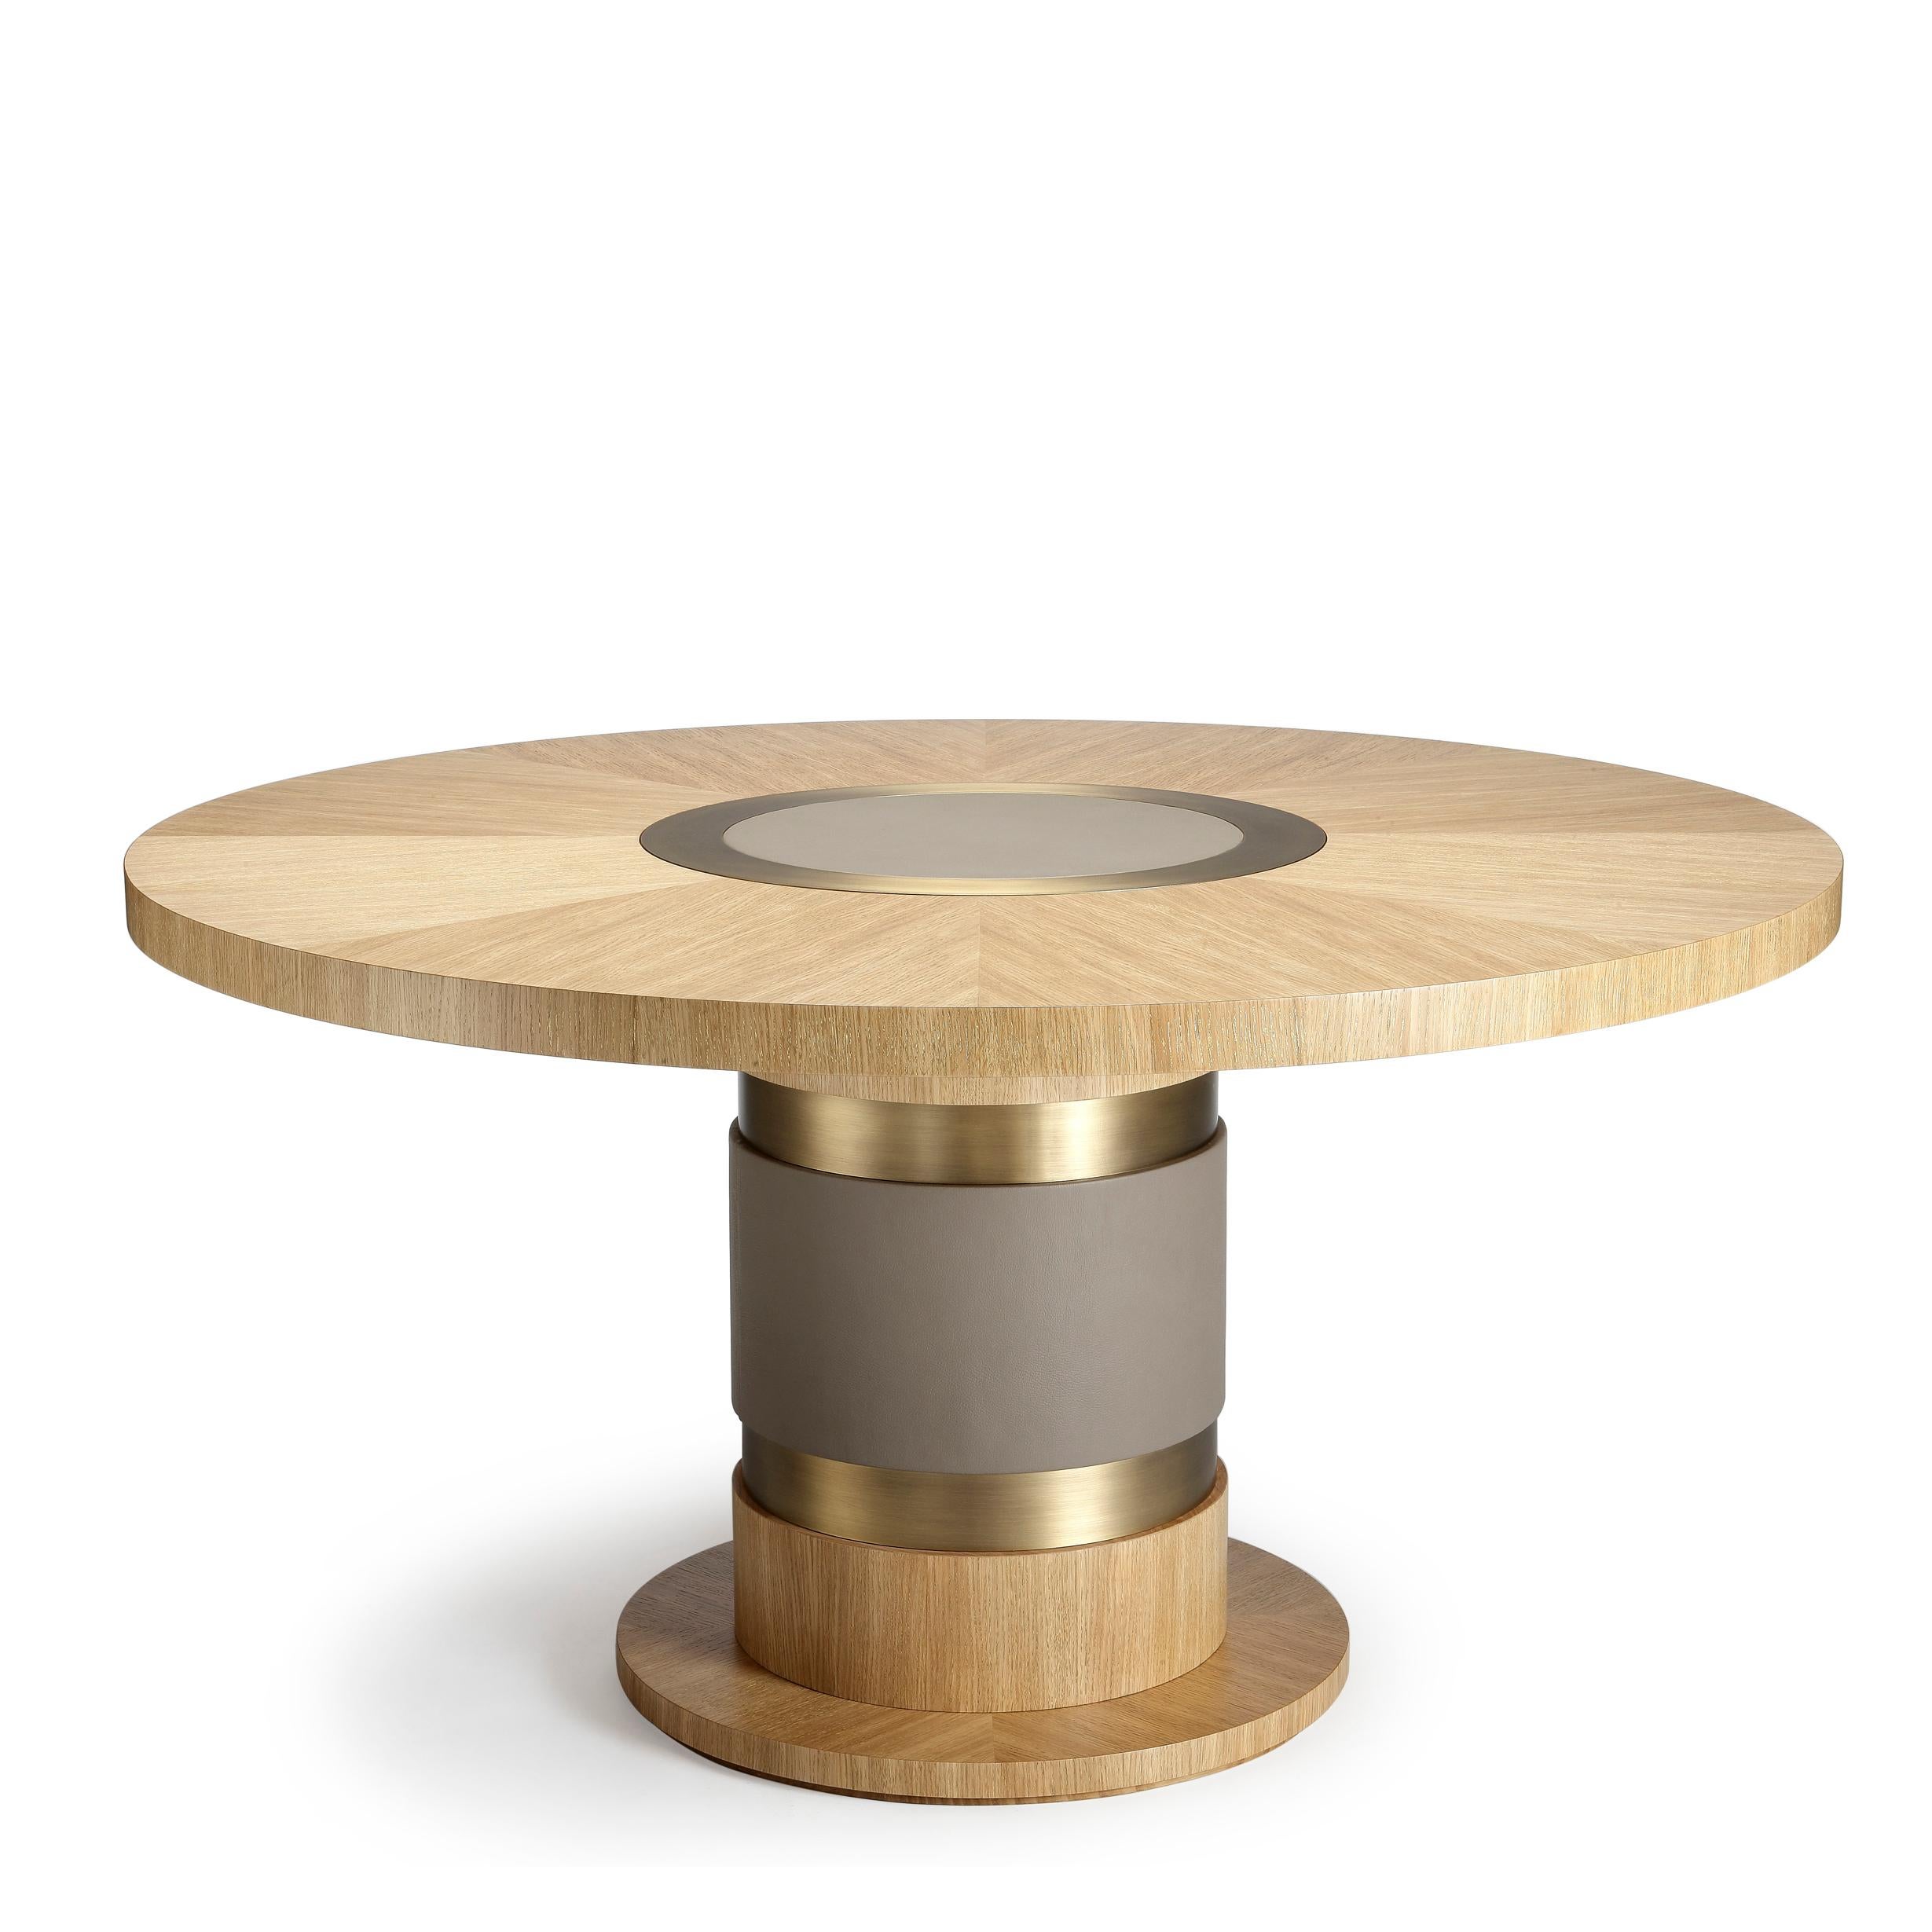 Lune Table, in Gold Limed Oak, Bronze and Leather Details, Handcrafted by Duistt

The Lune table is pertfect example to show how well mixed materials can work together to create a truly unique piece. The combination of a special, yet discrete, gold